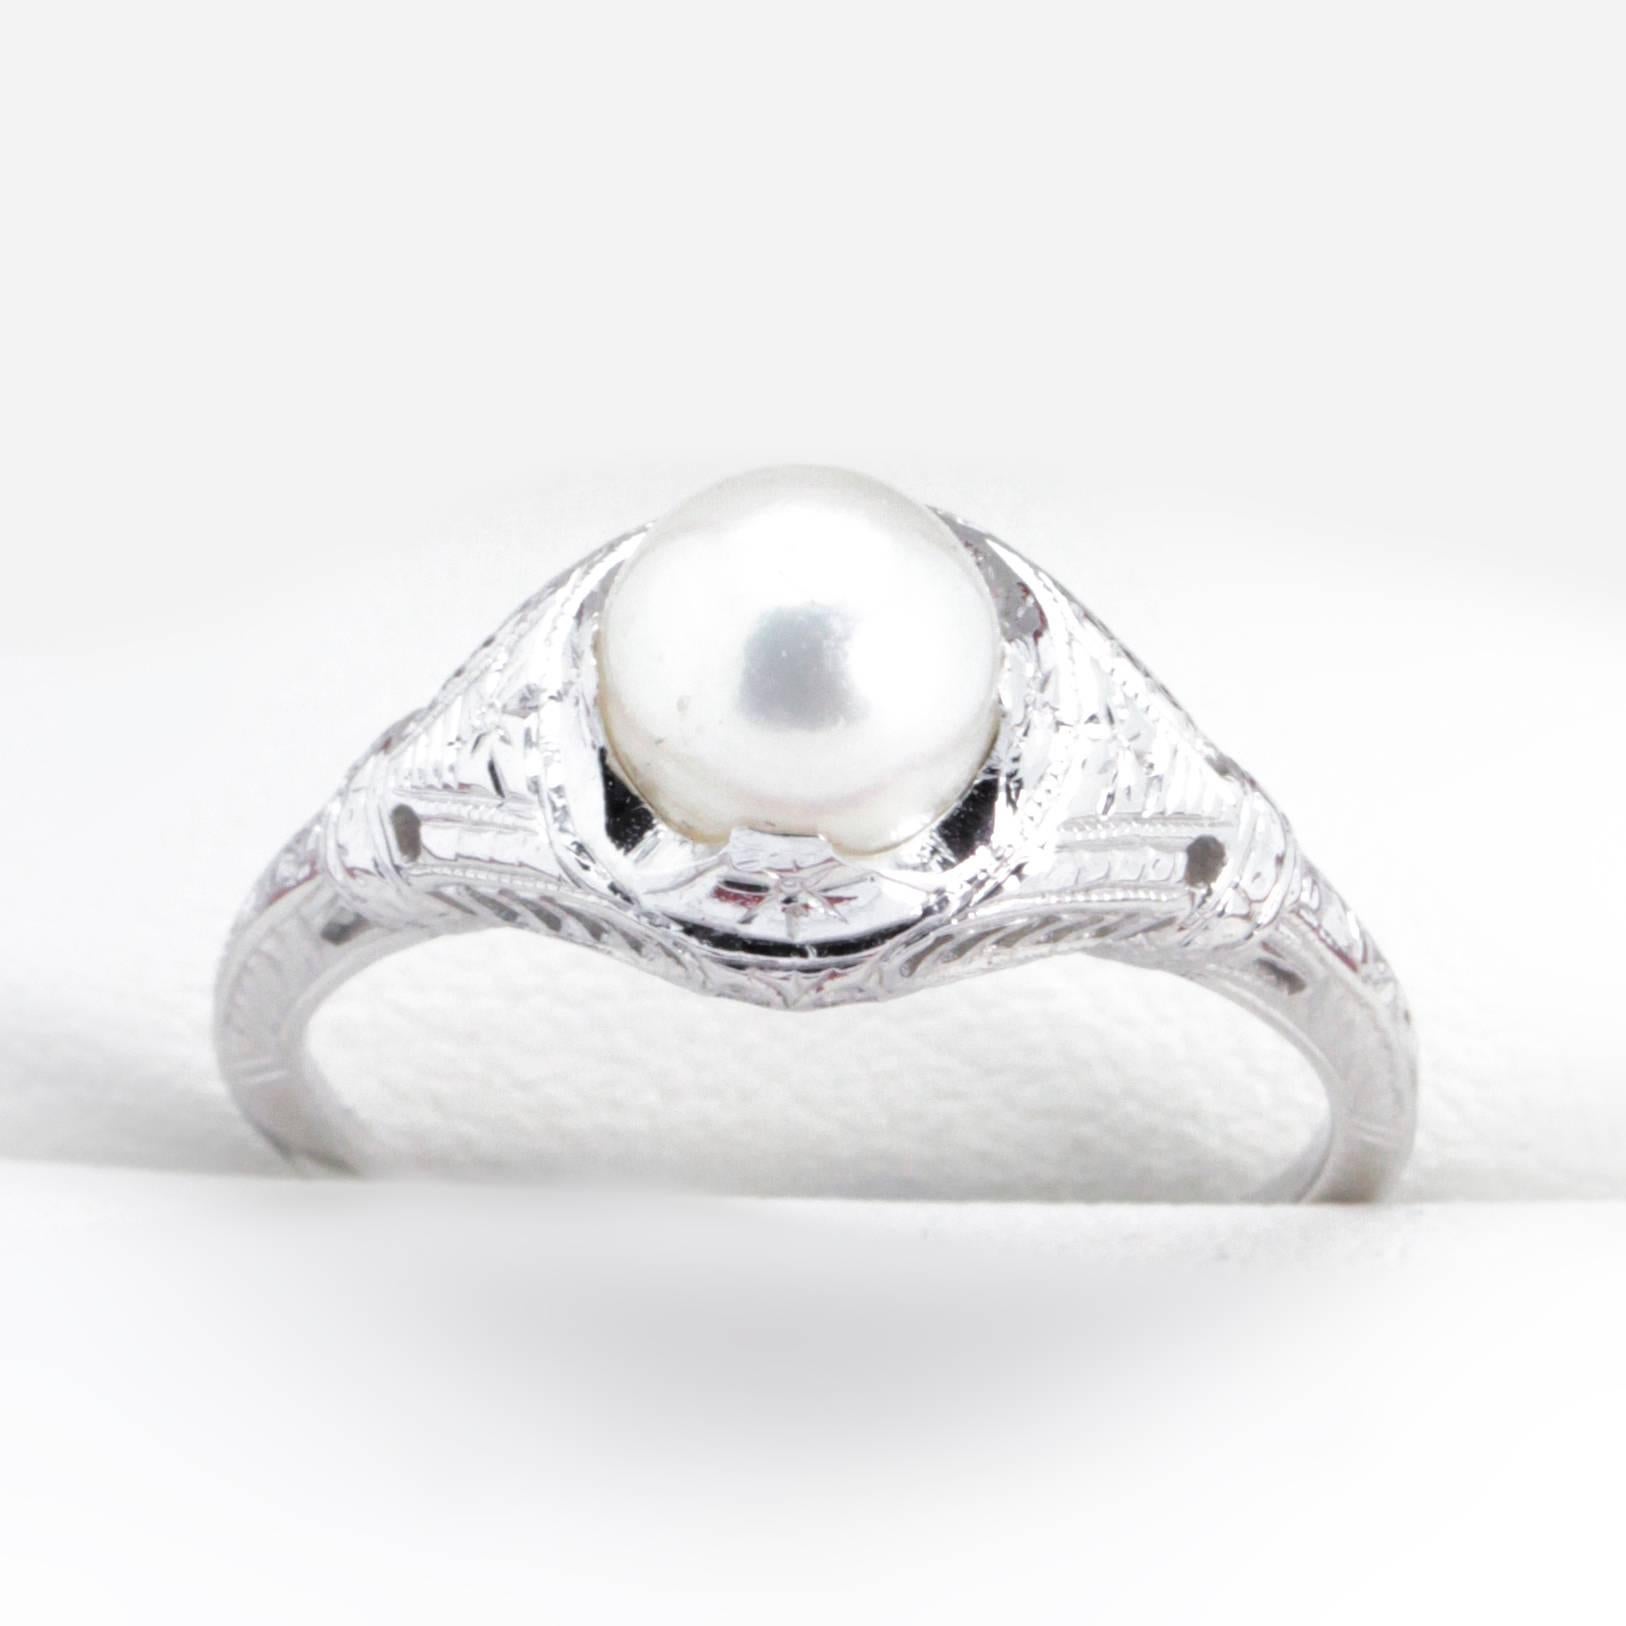 Antique Art Deco Pearl and Filigree Engagement or Cocktail Ring

An 18ct White Gold Art Deco antique filigree Pearl Ring featuring a cultured Pearl, four claw set in a 3.50 - 0.80mm wide half round tapered shank, stamped 18k. 

The ring is in a very